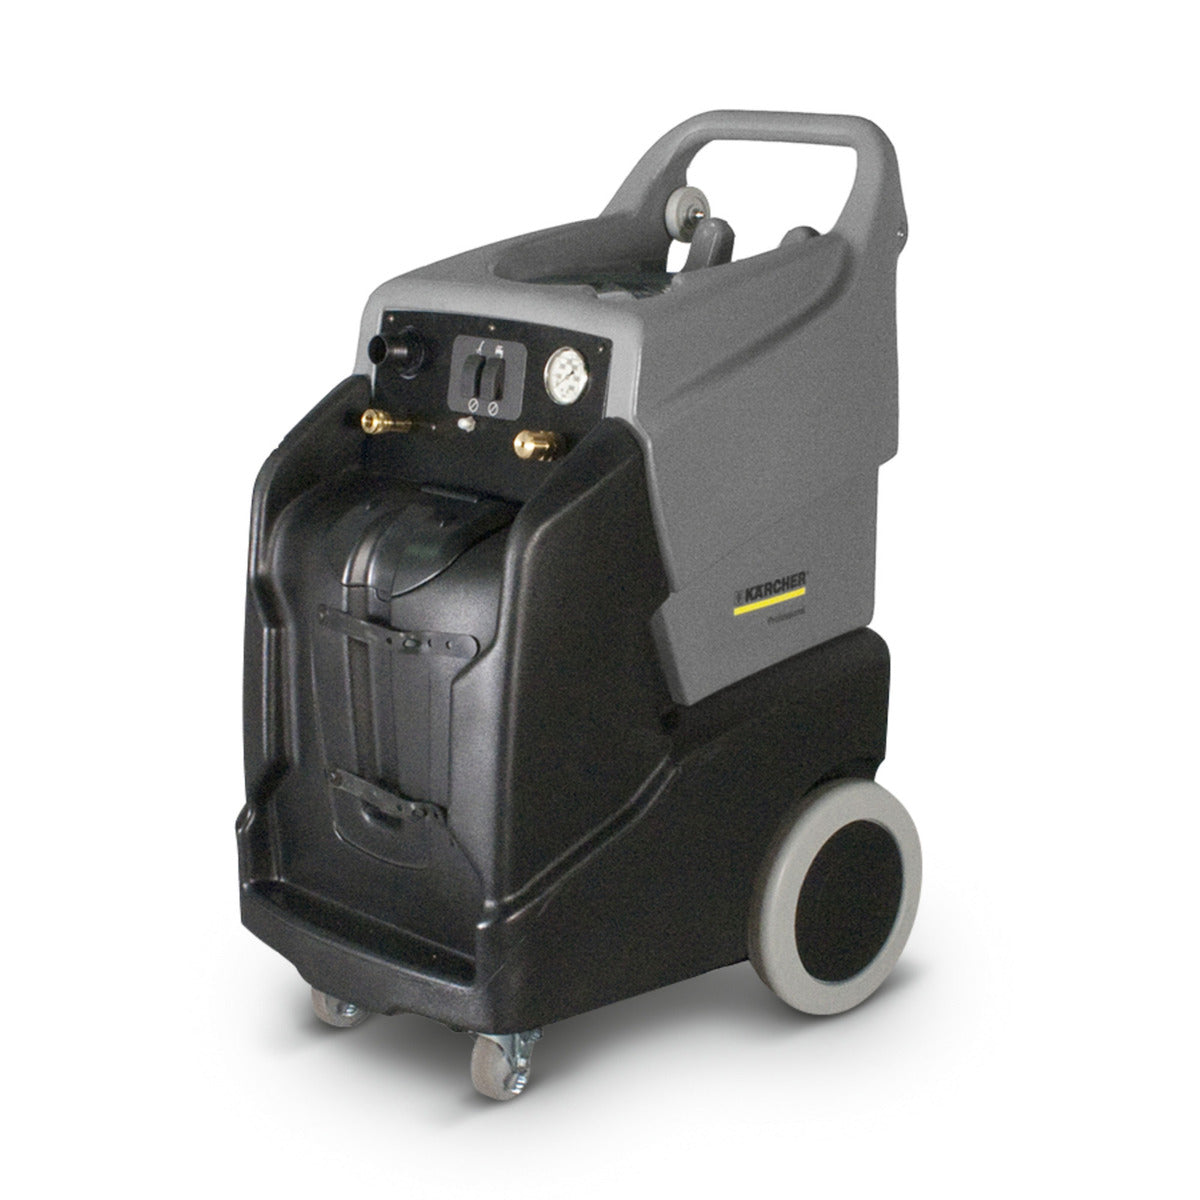 Karcher Windsor Puzzi 50/35 C and 50/14 E, Carpet Extractor, 13 Gallon, 200 or 500 PSI, Cold or Hot Water, No Tools or With Tools